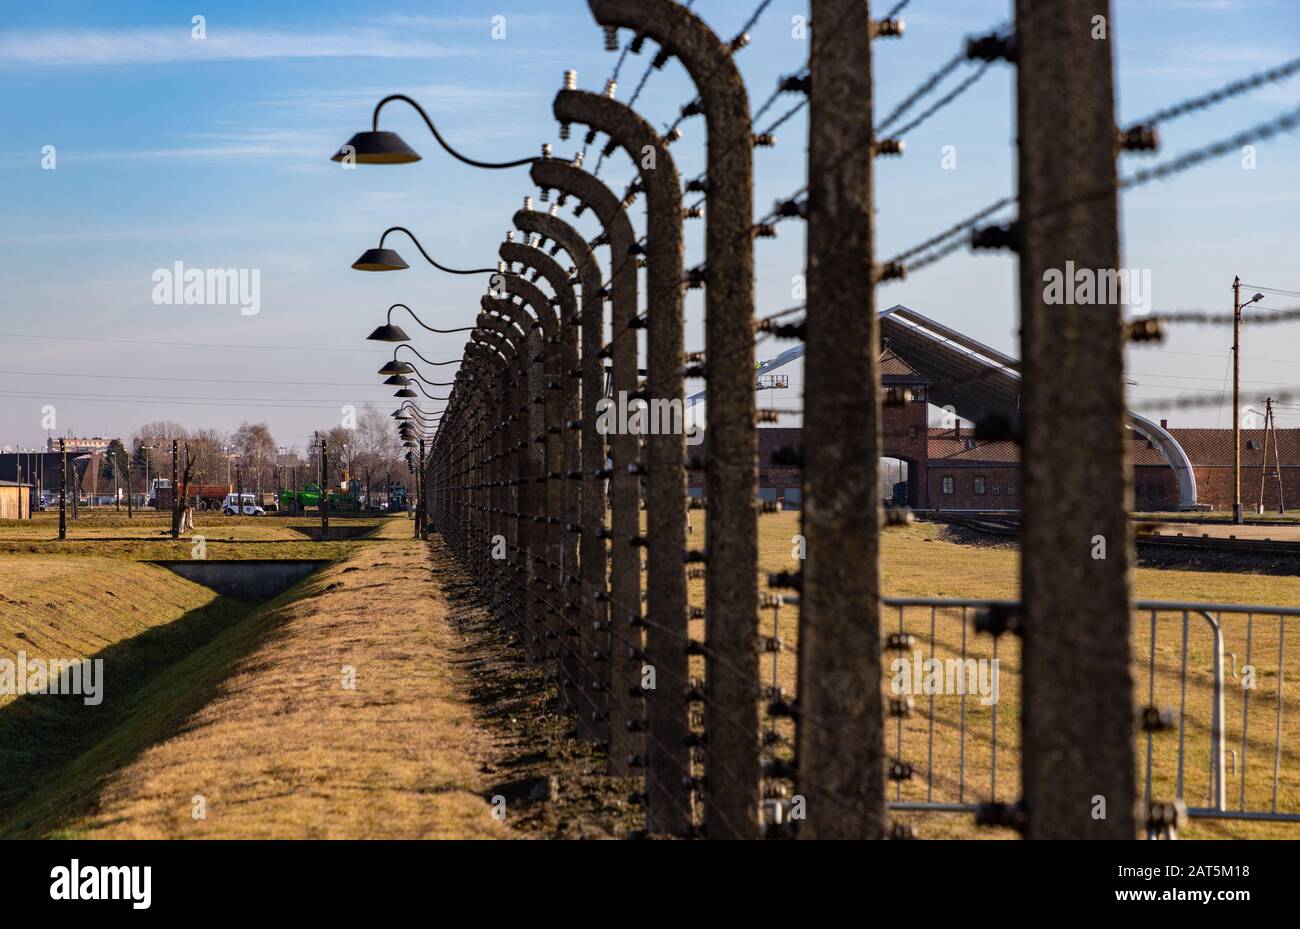 A picture of the fences on the grounds of Auschwitz II - Birkenau. Stock Photo